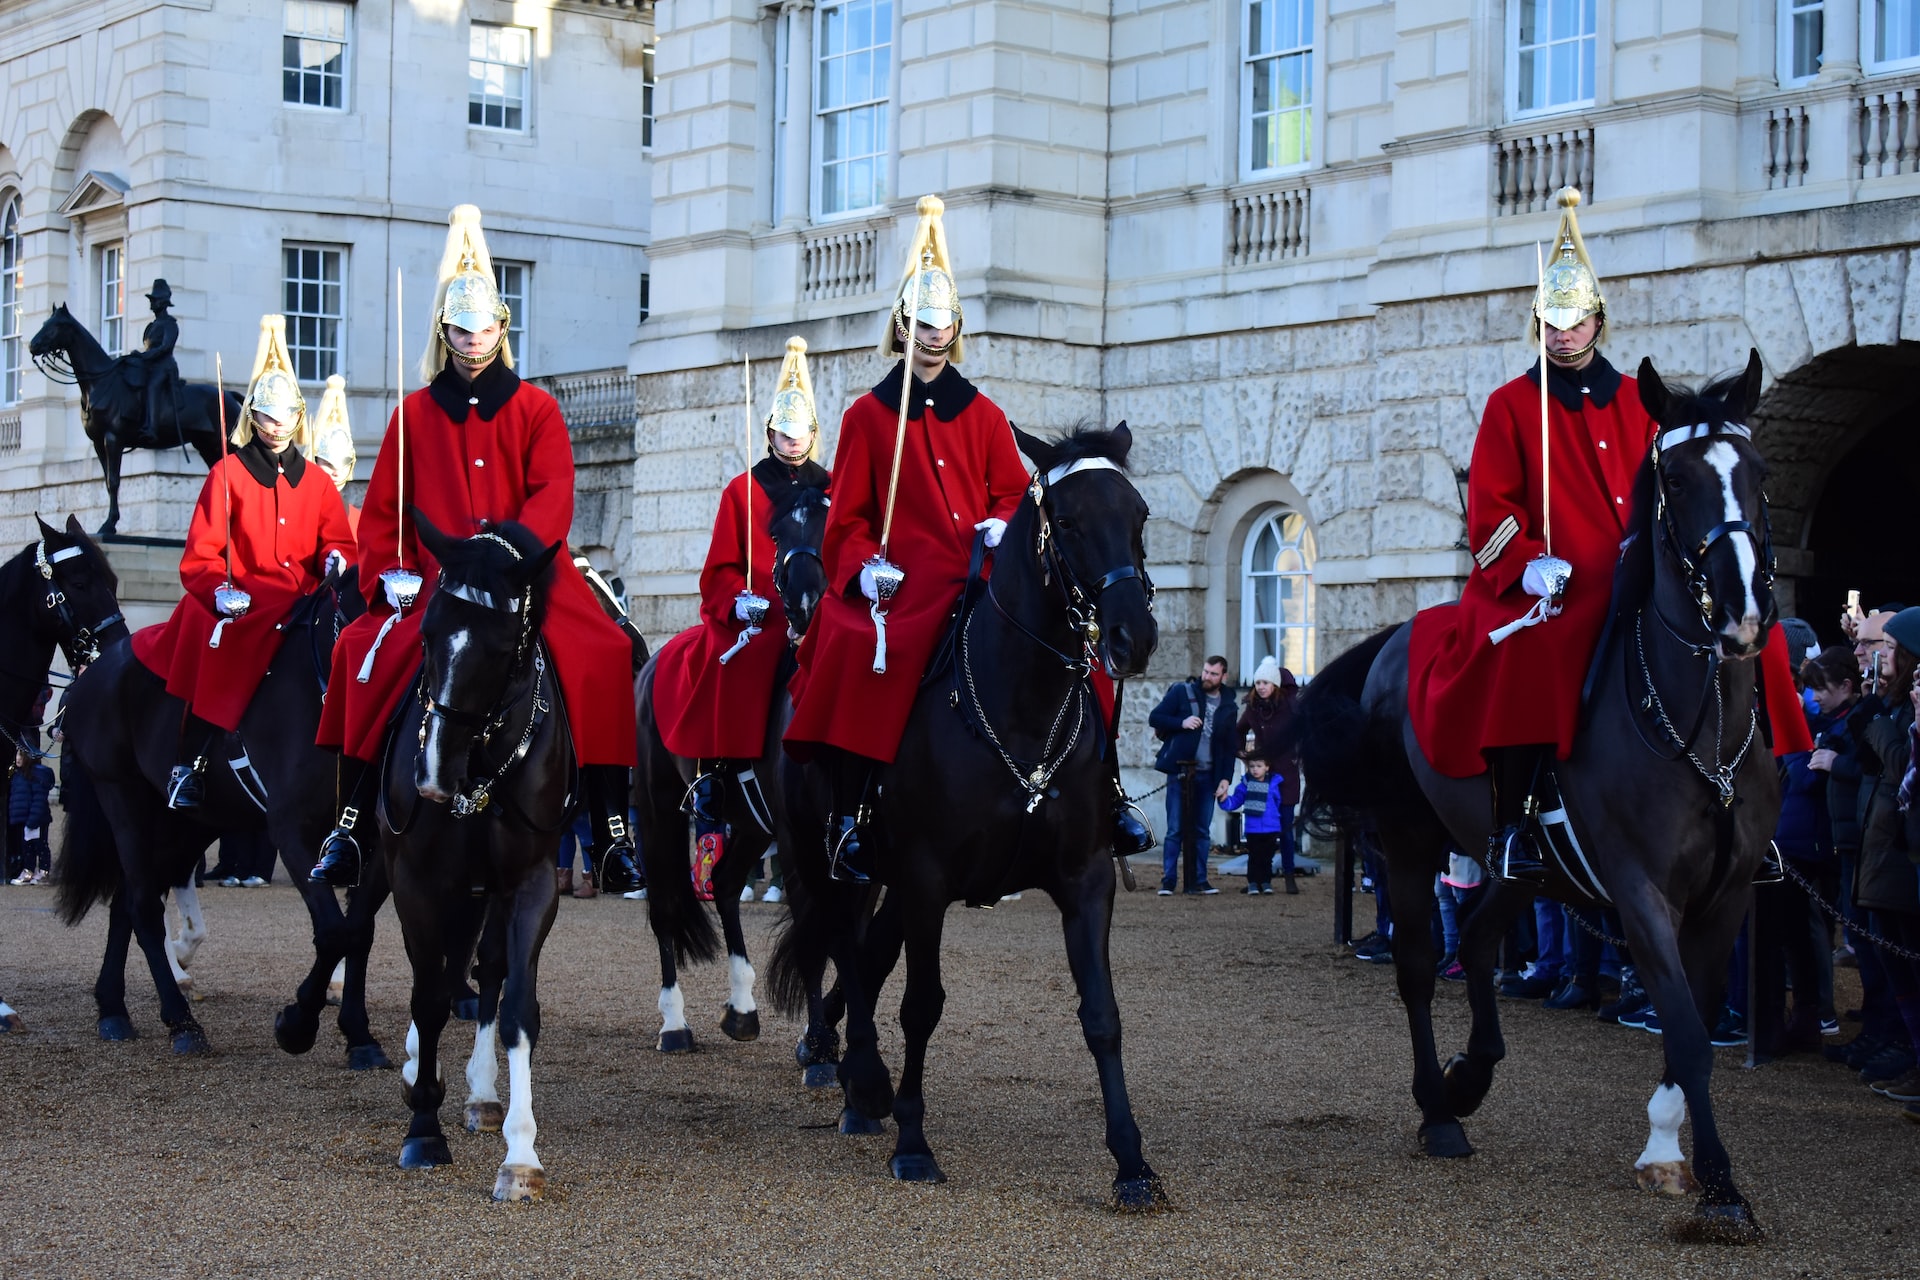 Best Free Things to do in London - Changing of Guard Ceremony Buckingham Palace